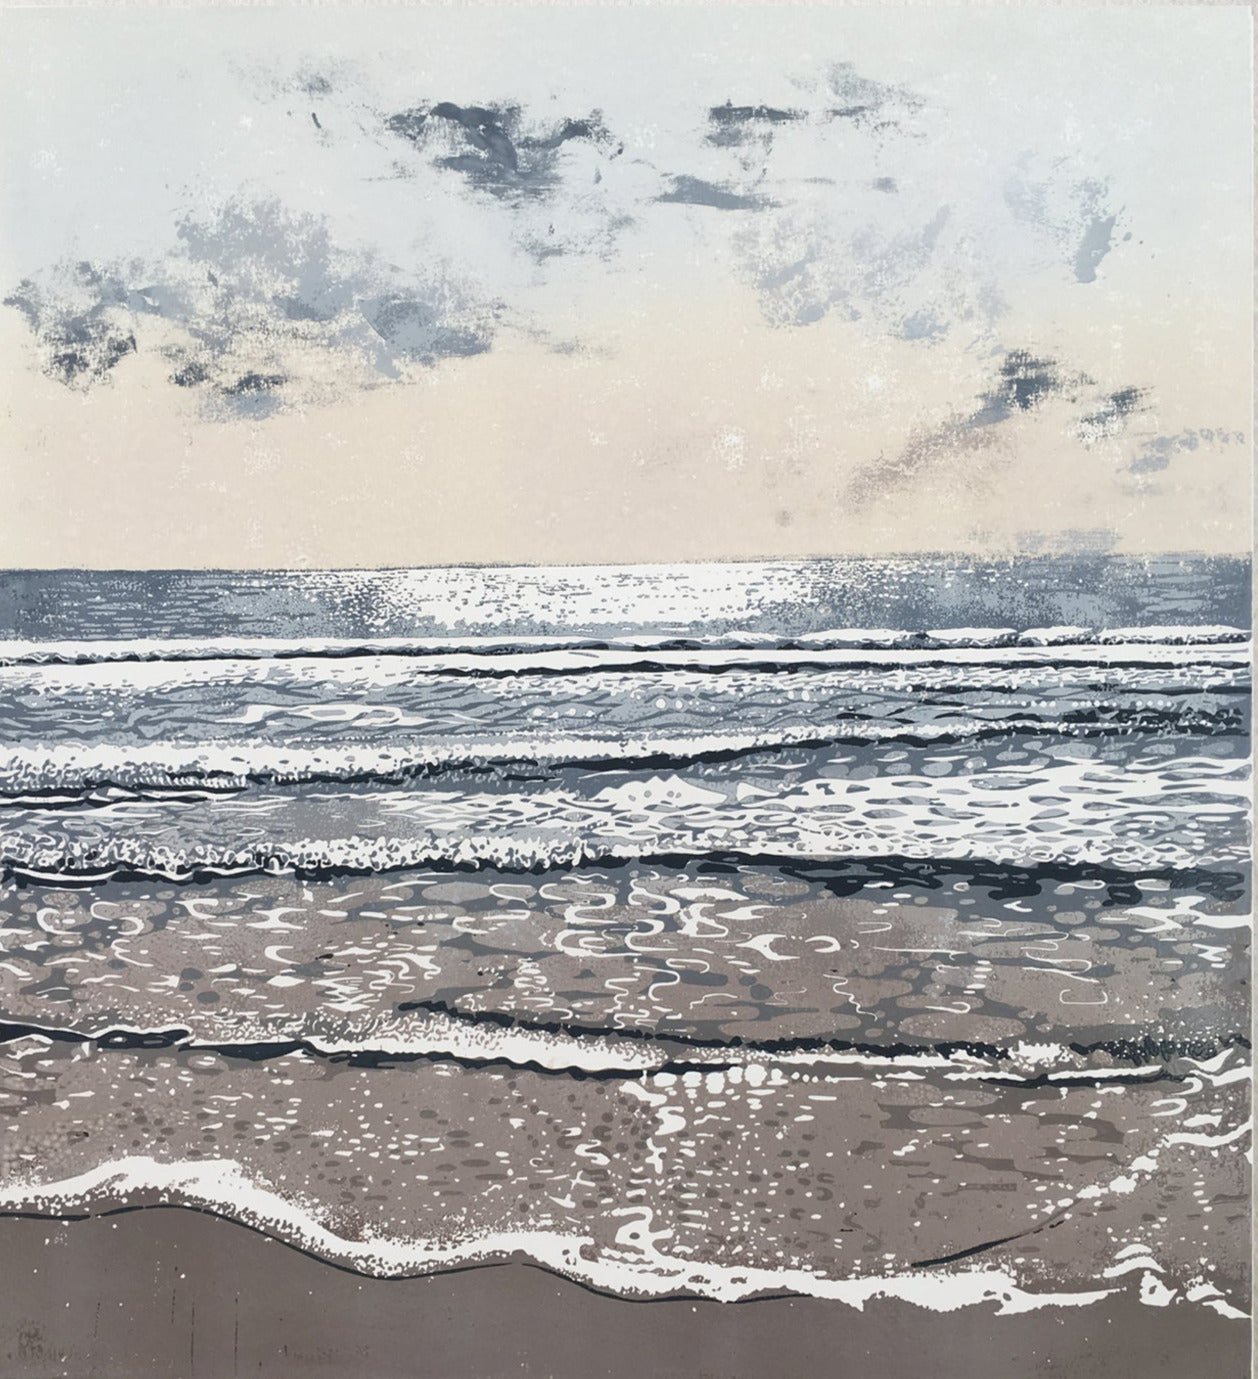 Late afternoon and the tide lapping the beach at Praa Sands. Art print from an original linocut. Cornish beaches, Cornwall. Seaside. Tides. Exploring the Cornish coast.